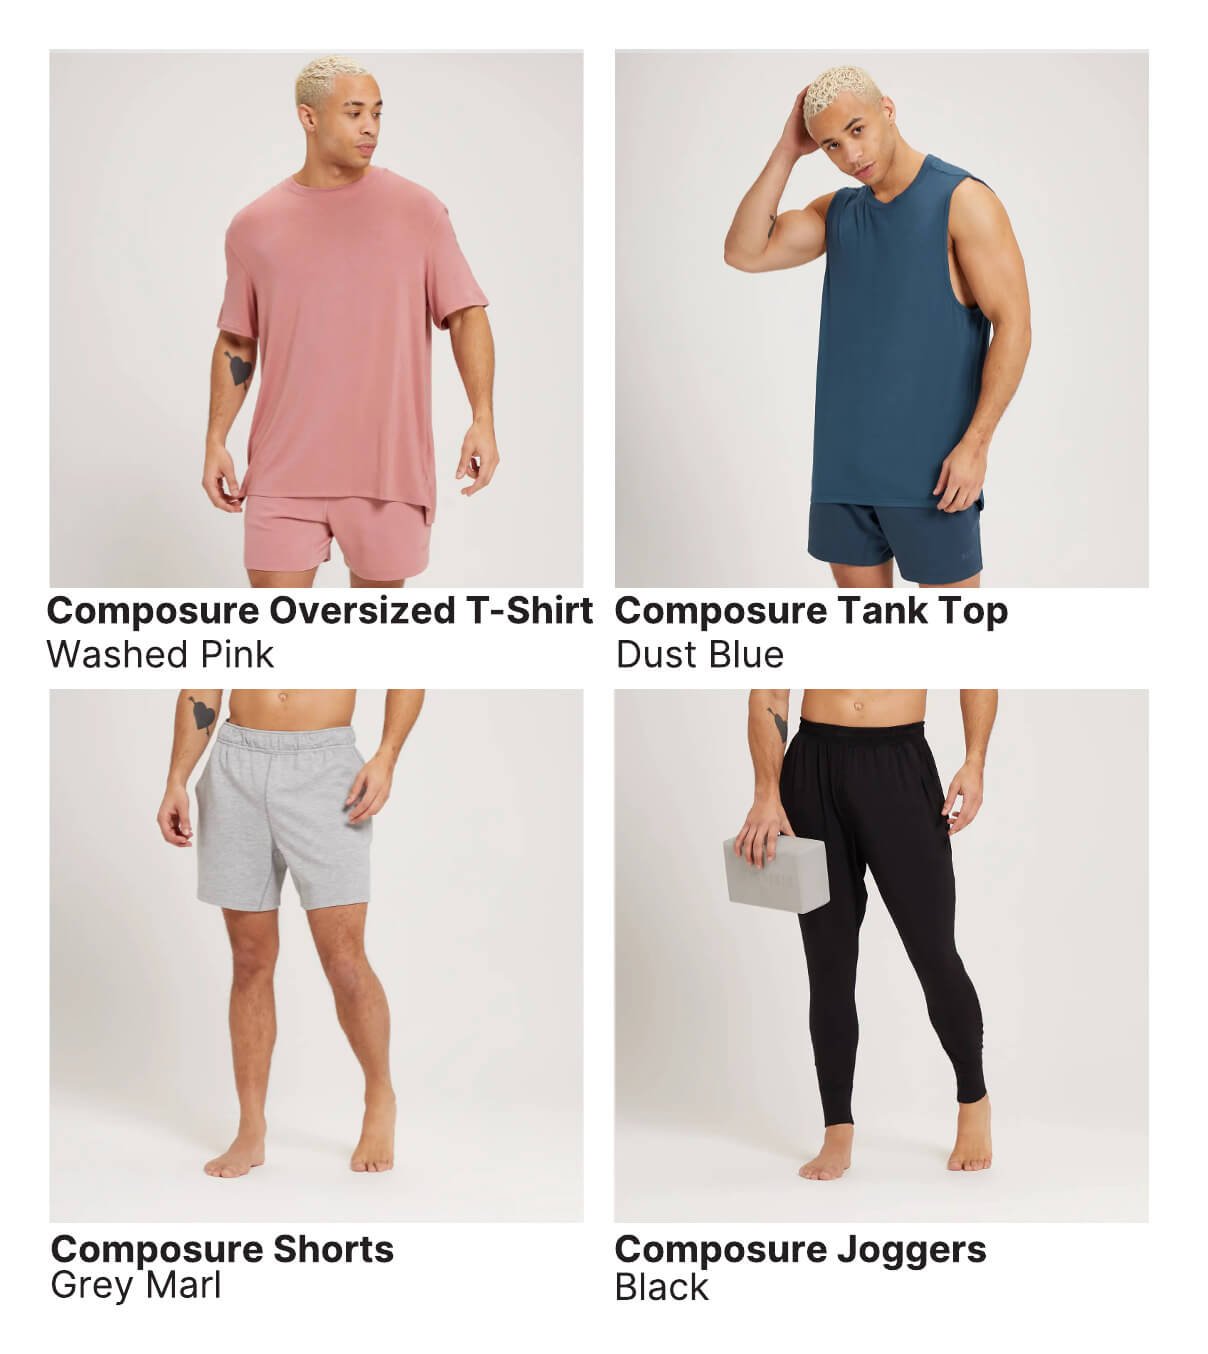 https://www.myprotein.com/clothing/collections/composure/products.list?pageNumber=1&facetFilters=en_gender_content:Men